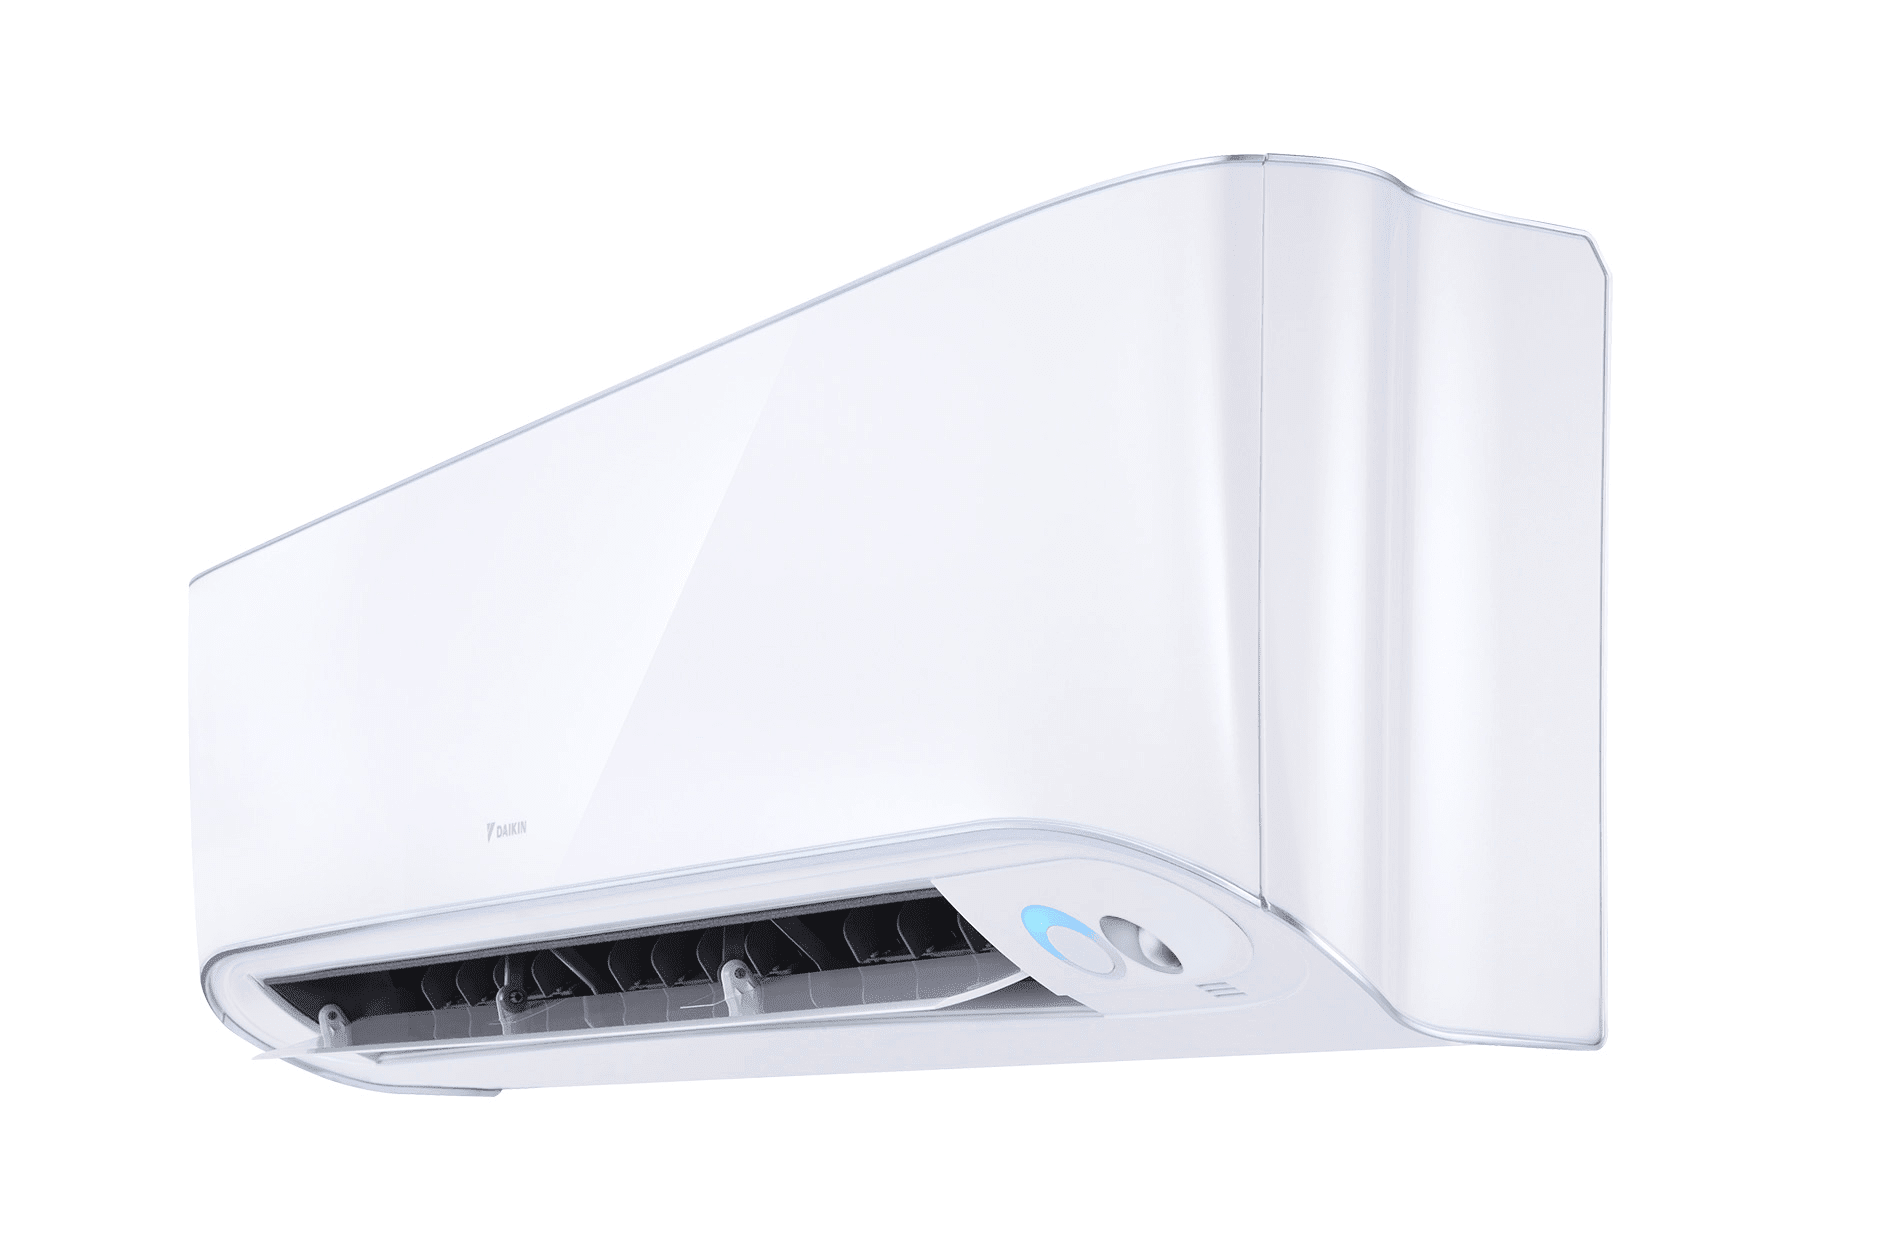 8 Best Inverter Air Conditioners Malaysia 2020 - Top ...